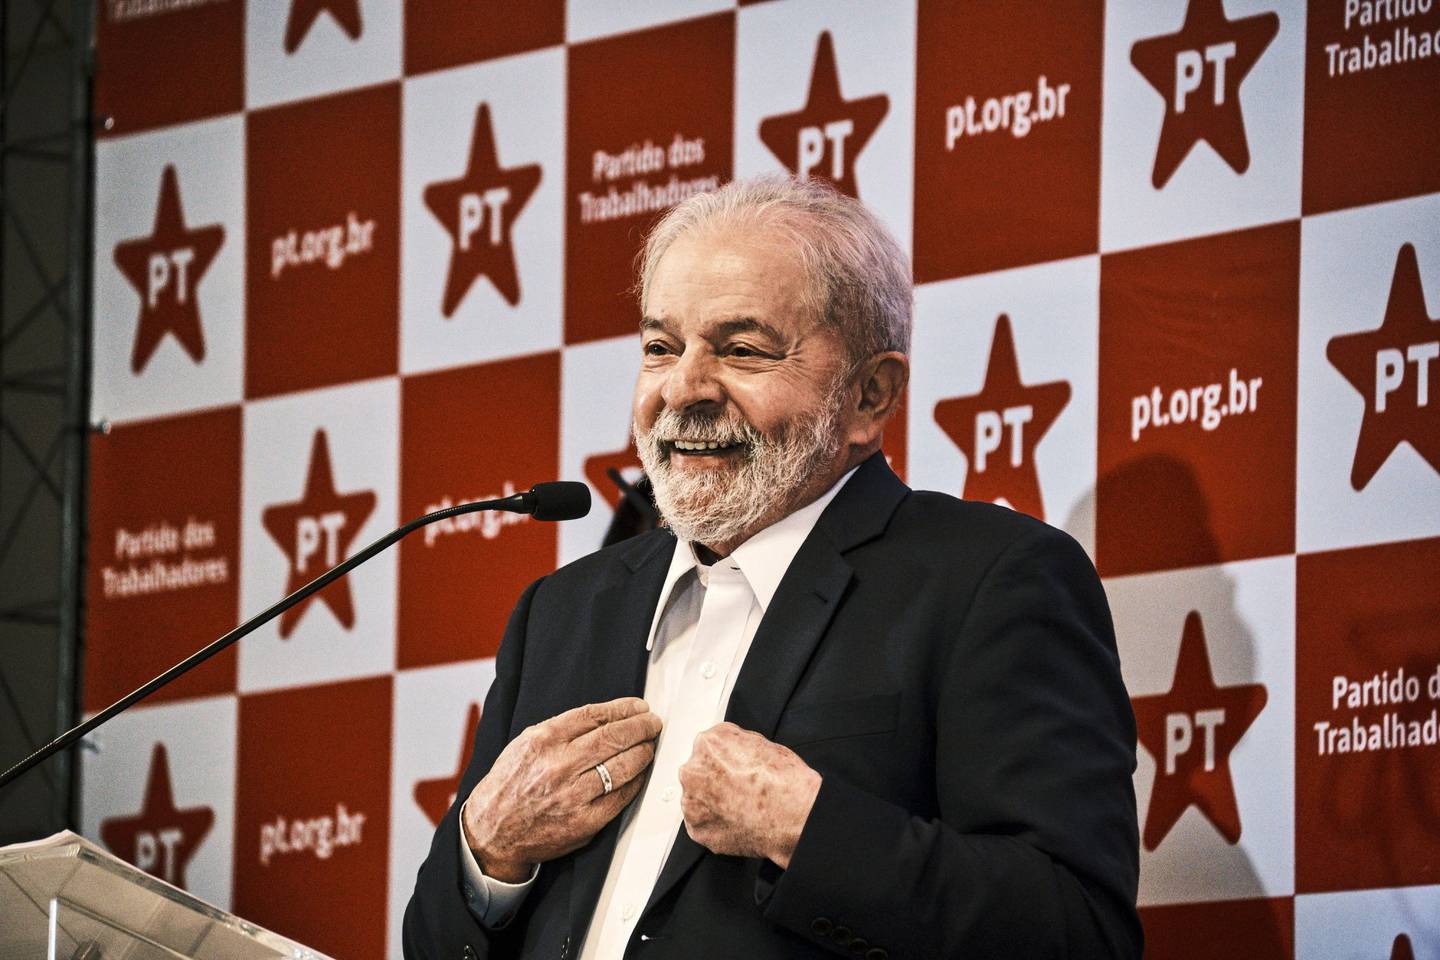 Luiz Inacio Lula da Silva, Brazil's former president, speaks during a news conference in Brasilia, Brazil, on Friday, Oct. 8, 2021. Lula said that he is not yet discussing political composition for the 2022 elections and that he has not yet decided on names to become vice president or Economy Minister.dfd